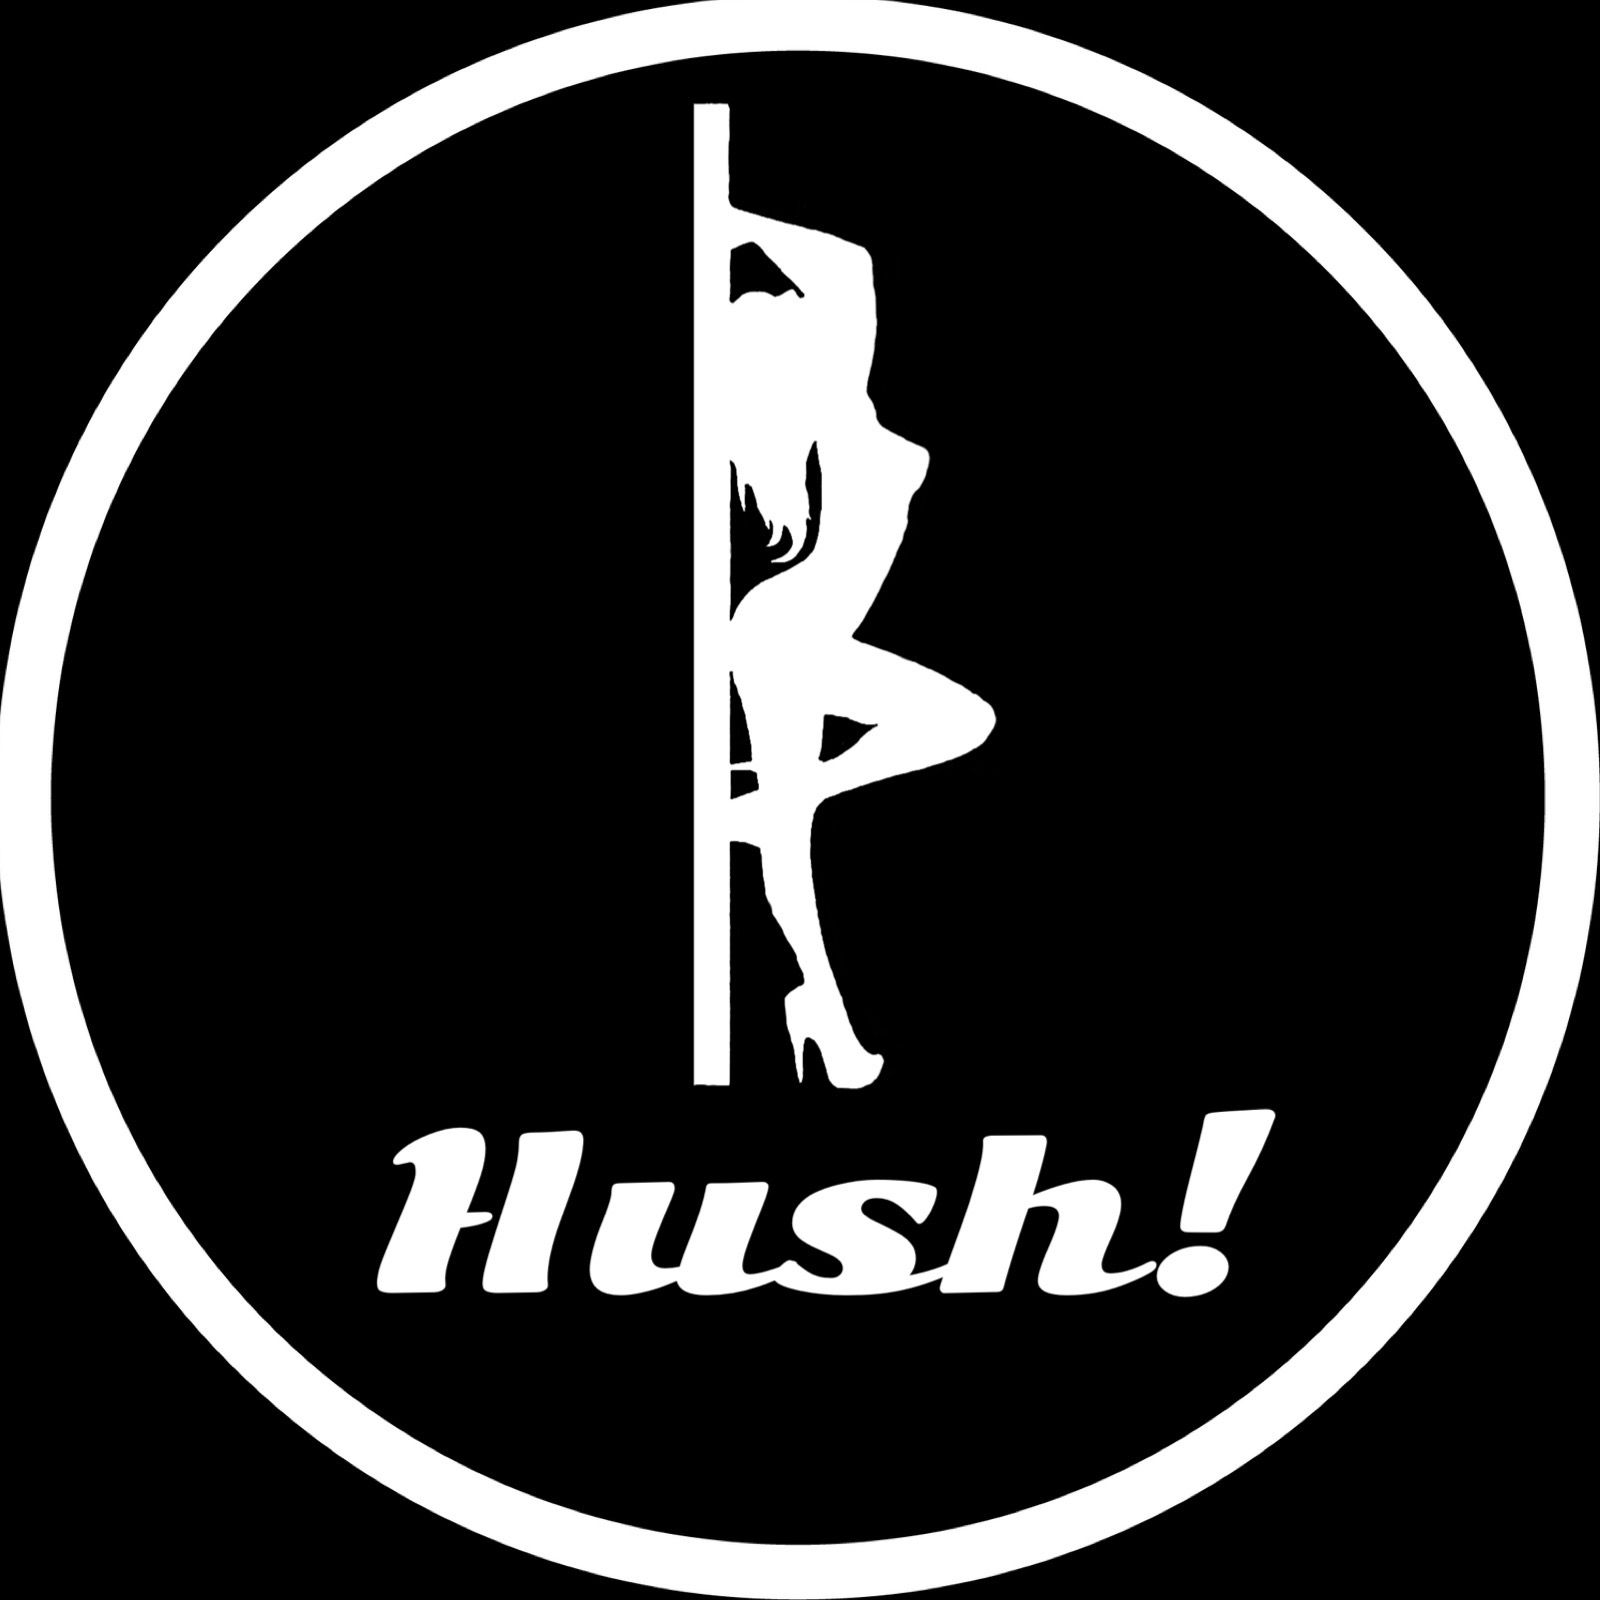 Hush! - Hush! Vol. 49- One on One with Ember Snow